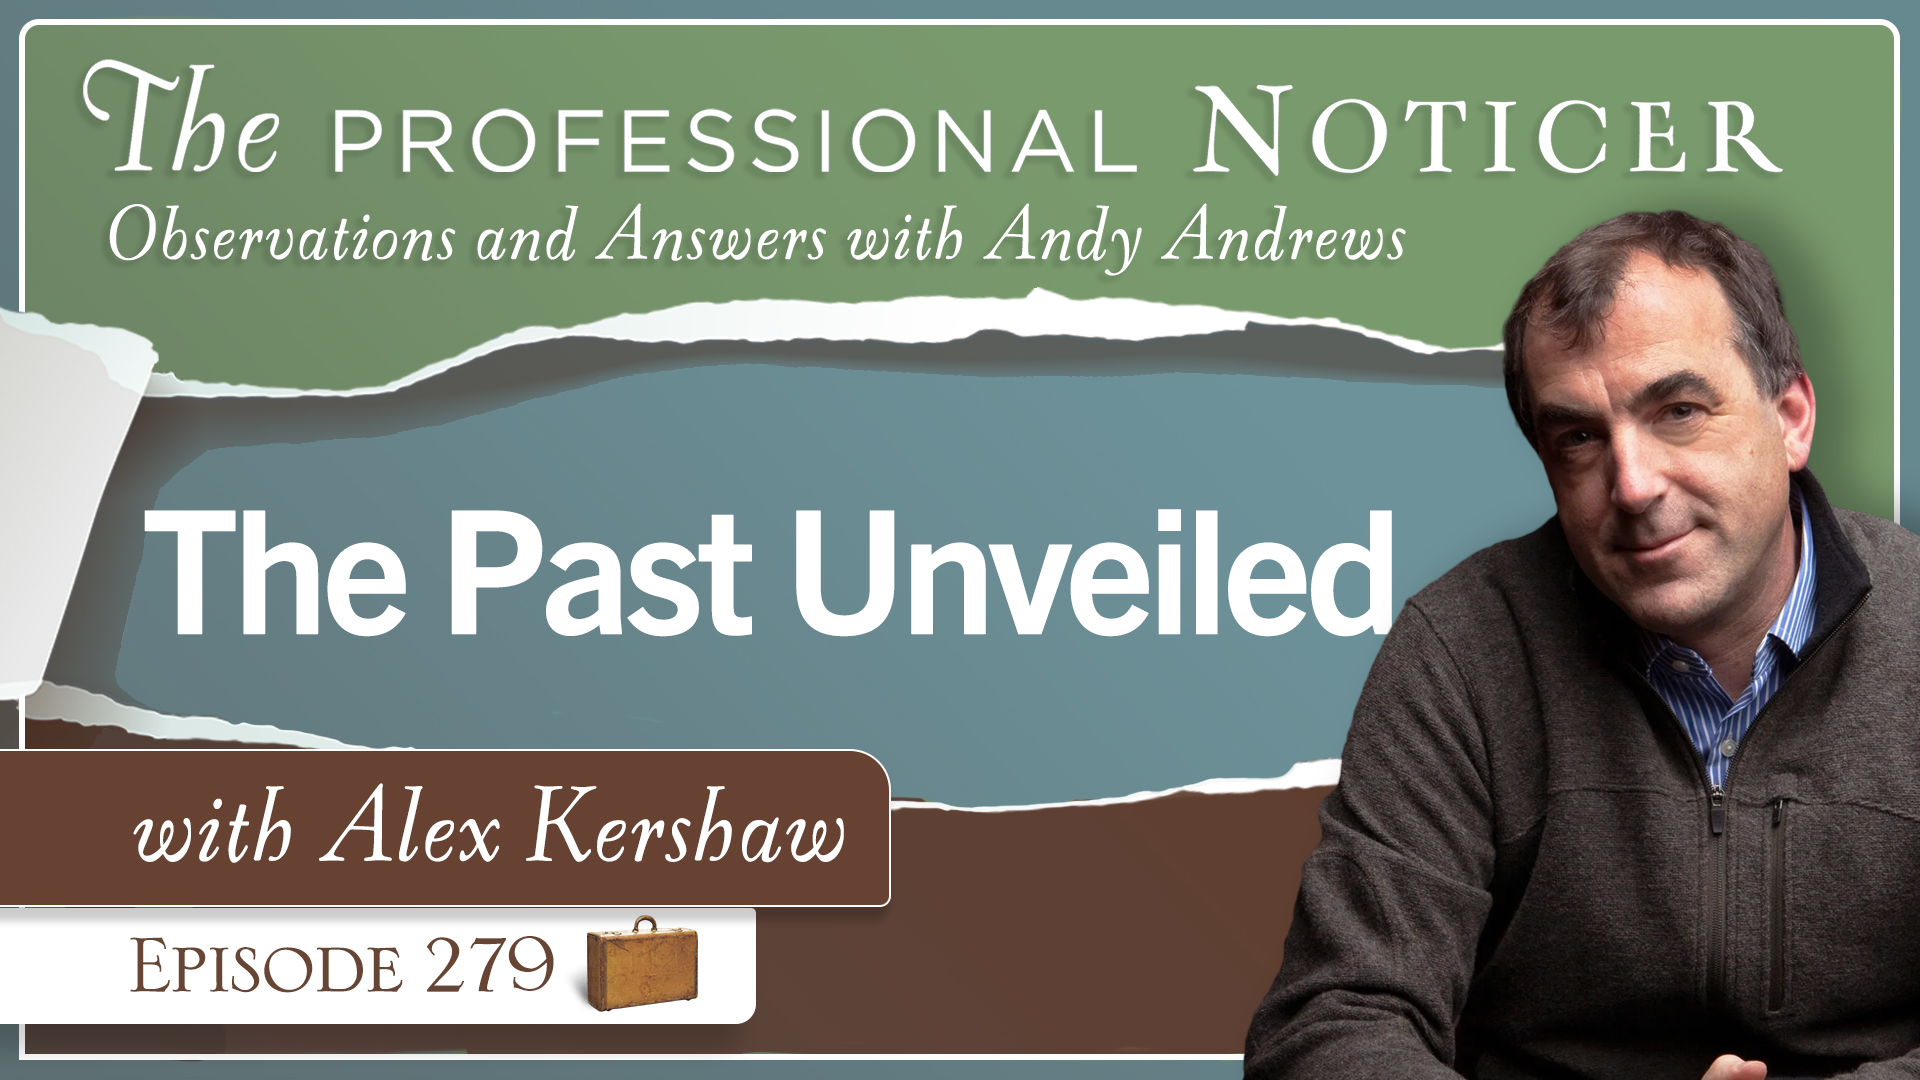 The Past Unveiled with Alex Kershaw